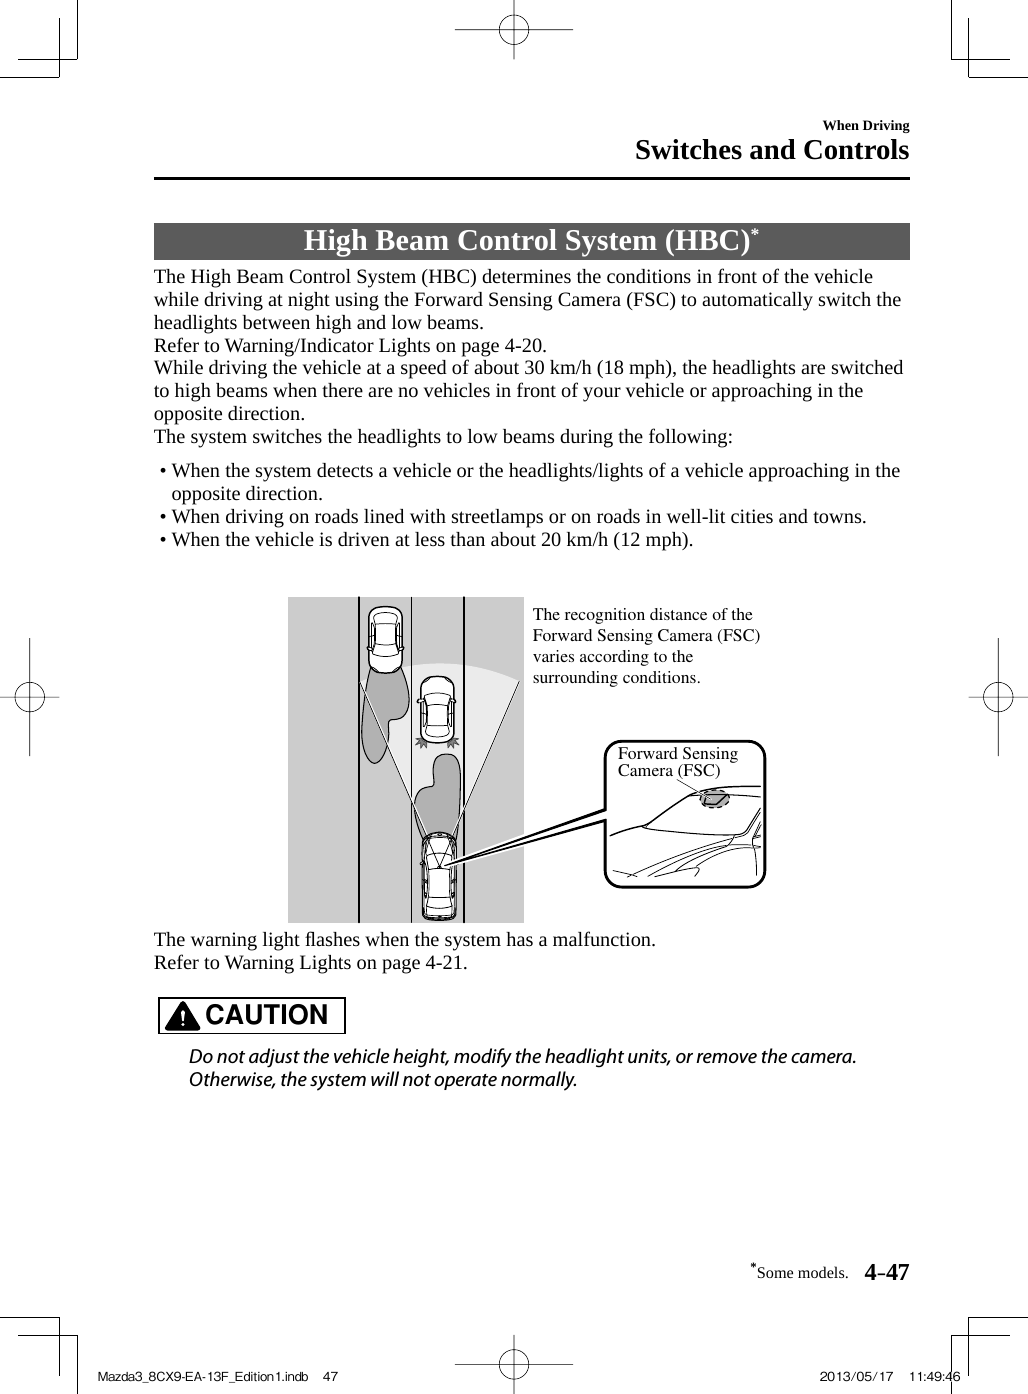 *Some models. 4–47When DrivingSwitches and Controls High Beam Control System (HBC) *             The High Beam Control System (HBC) determines the conditions in front of the vehicle while driving at night using the Forward Sensing Camera (FSC) to automatically switch the headlights between high and low beams.  Refer to Warning/Indicator Lights on page  4-20 .  While driving the vehicle at a speed of about 30 km/h (18 mph), the headlights are switched to high beams when there are no vehicles in front of your vehicle or approaching in the opposite direction.   The system switches the headlights to low beams during the following:   •       When the system detects a vehicle or the headlights/lights of a vehicle approaching in the opposite direction.•       When driving on roads lined with streetlamps or on roads in well-lit cities and towns.•       When the vehicle is driven at less than about 20 km/h (12 mph).       Forward Sensing Camera (FSC)The recognition distance of the Forward Sensing Camera (FSC) varies according to the surrounding conditions.   The  warning  light  ﬂ ashes when the system has a malfunction.  Refer to Warning Lights on page  4-21 .   CAUTION    Do not adjust the vehicle height, modify the headlight units, or remove the camera. Otherwise, the system will not operate normally.   Mazda3_8CX9-EA-13F_Edition1.indb   47Mazda3_8CX9-EA-13F_Edition1.indb   47 2013/05/17   11:49:462013/05/17   11:49:46